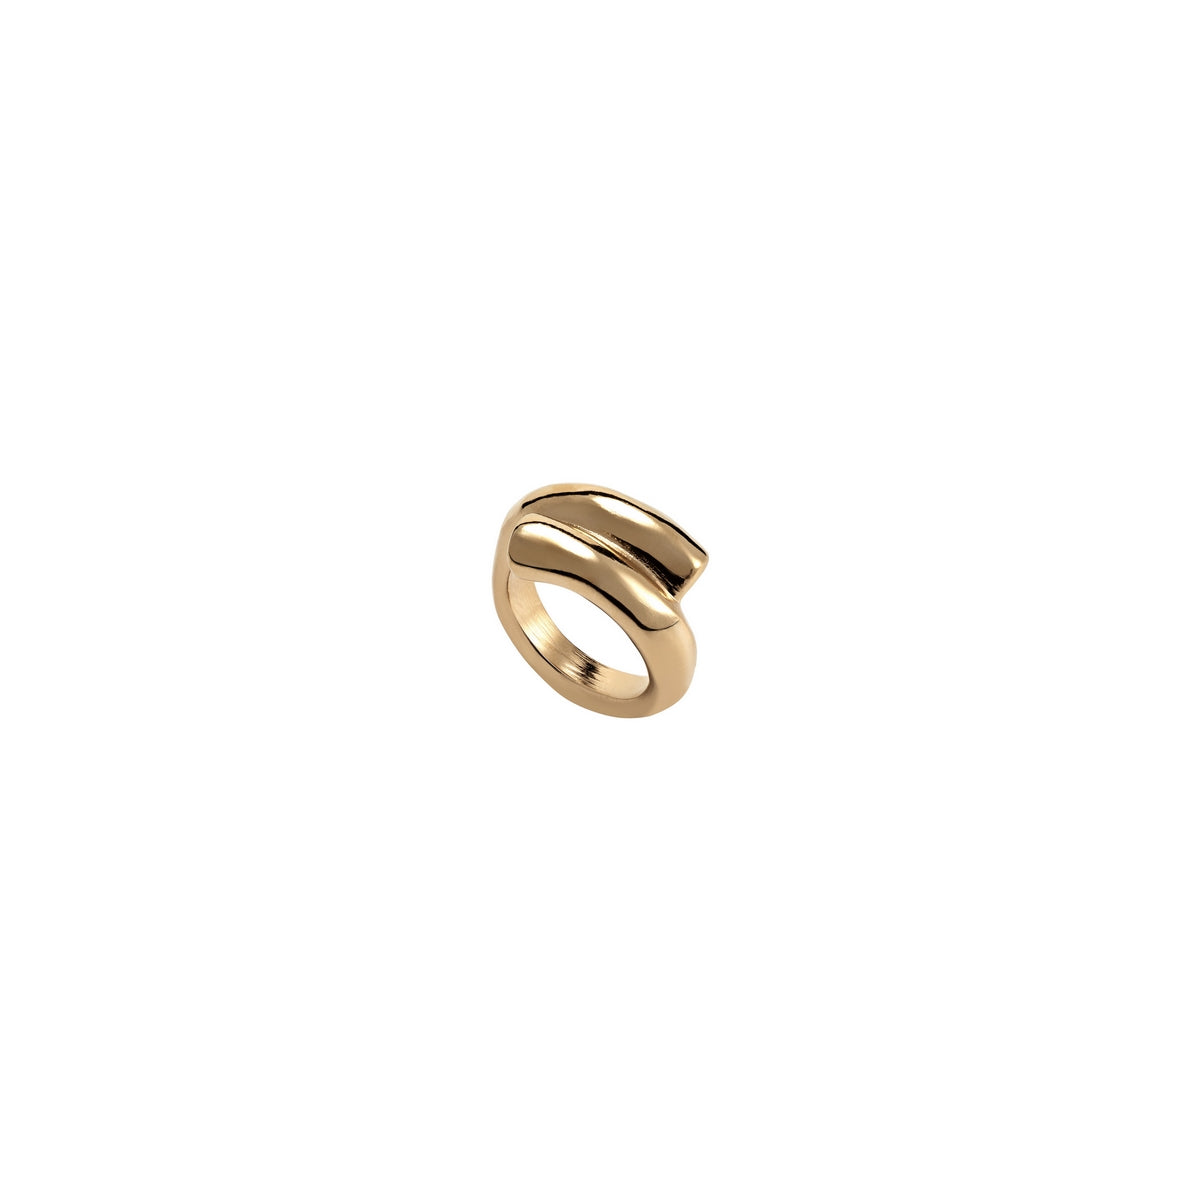 uno de 50 crossed legs tube-shaped gold-plated metal alloy ring closed in the middle